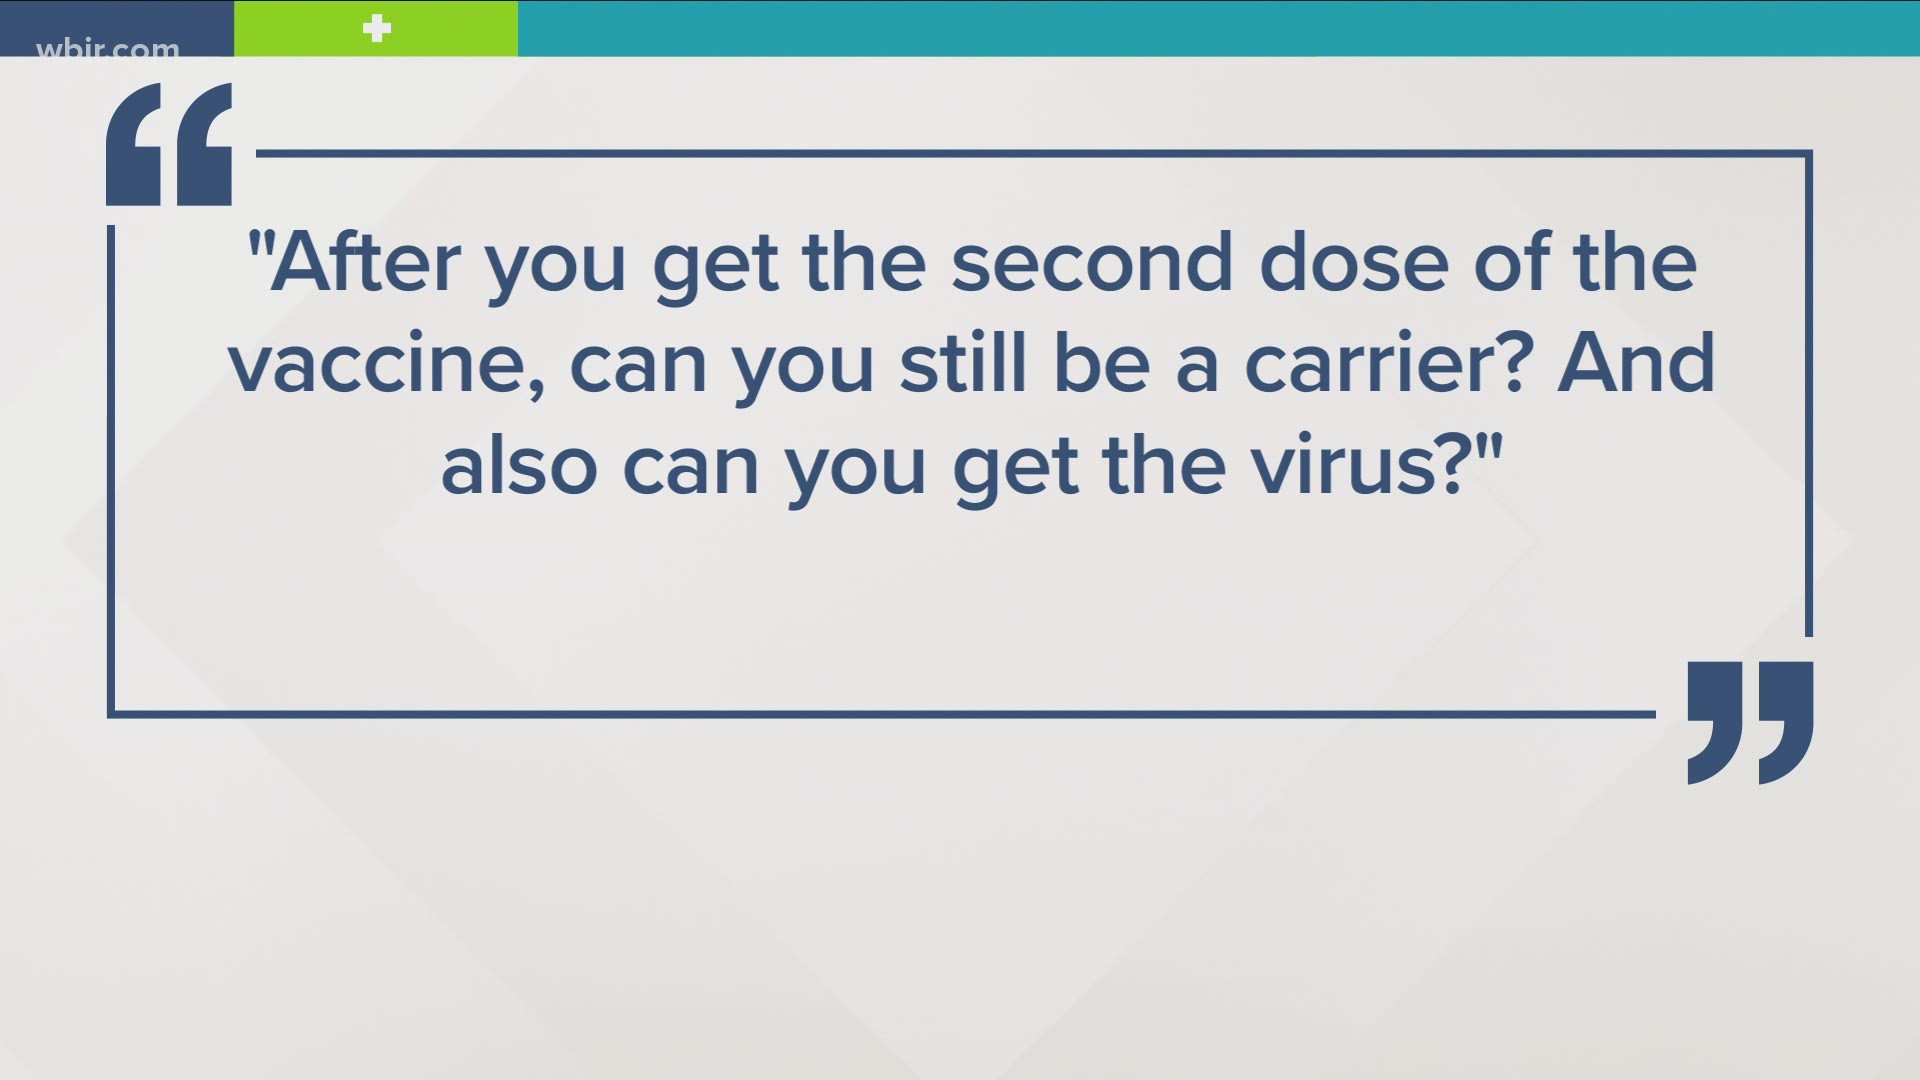 After you get the second dose of the vaccine, can you still be a carrier? And also can you get the virus?